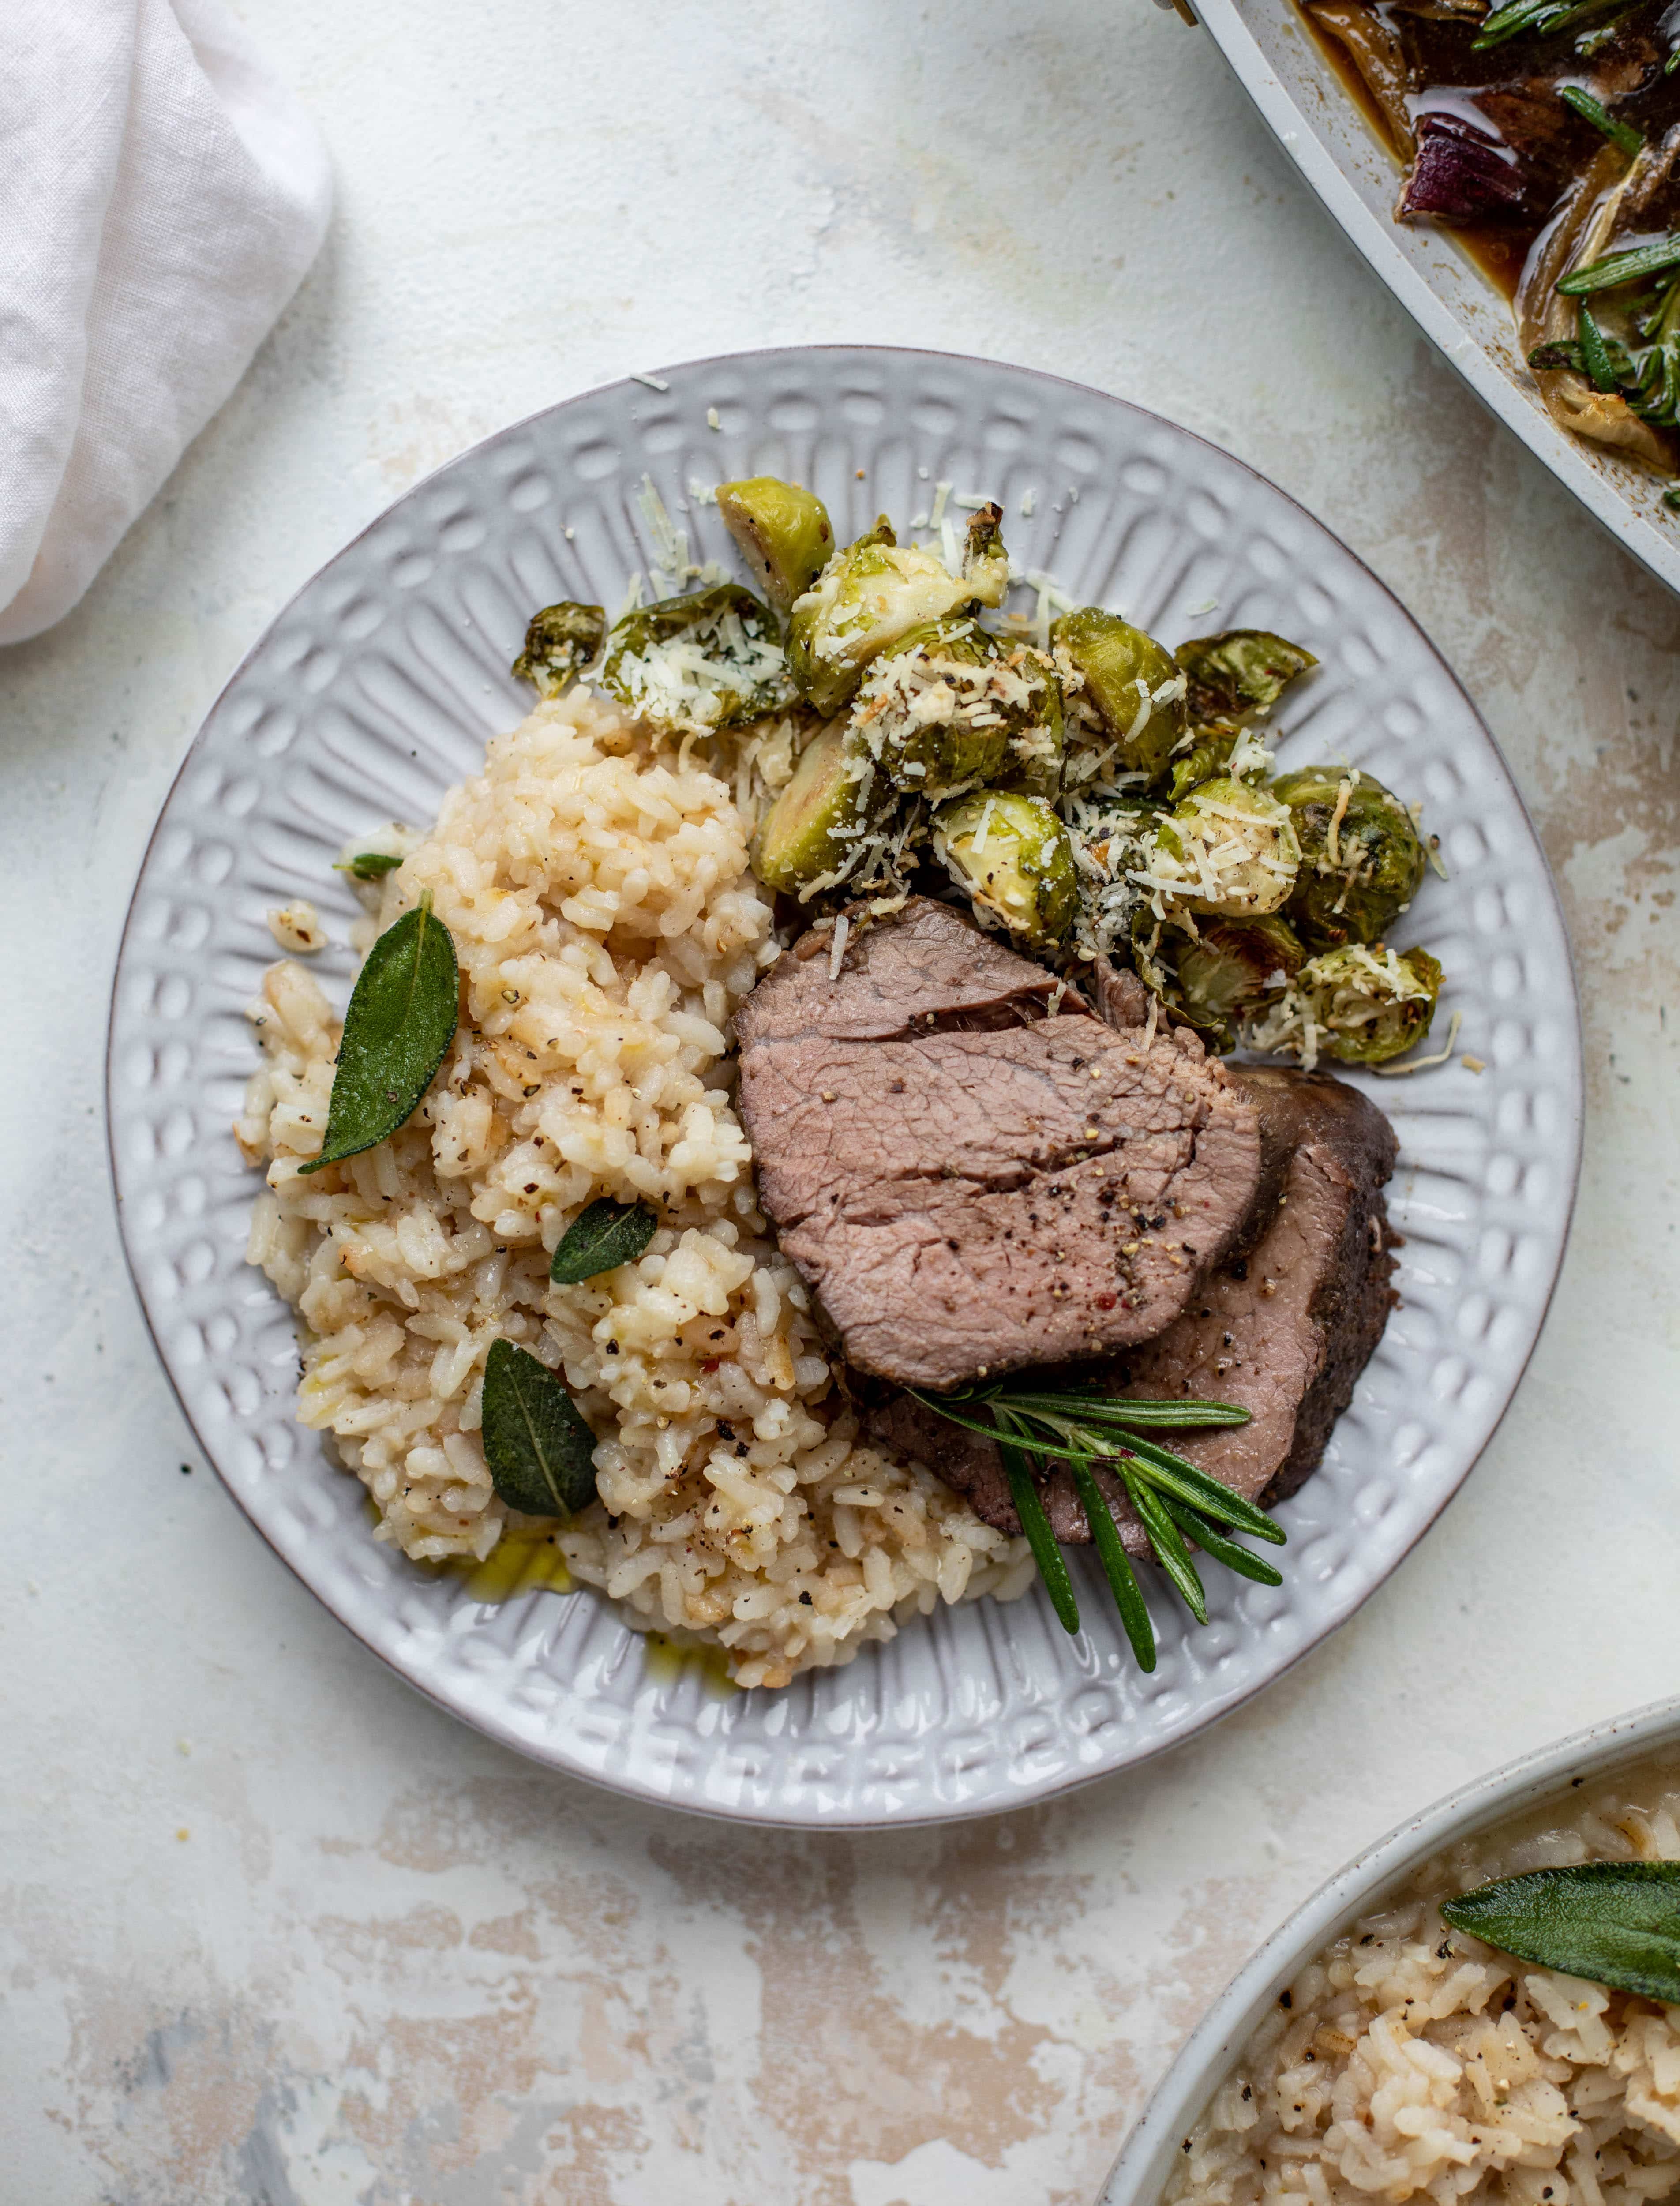 The ultimate special occasion meal! Espresso crusted filet paired with truffle sage risotto and cacio e pepe brussels. So much flavor - it's perfect for the holidays!